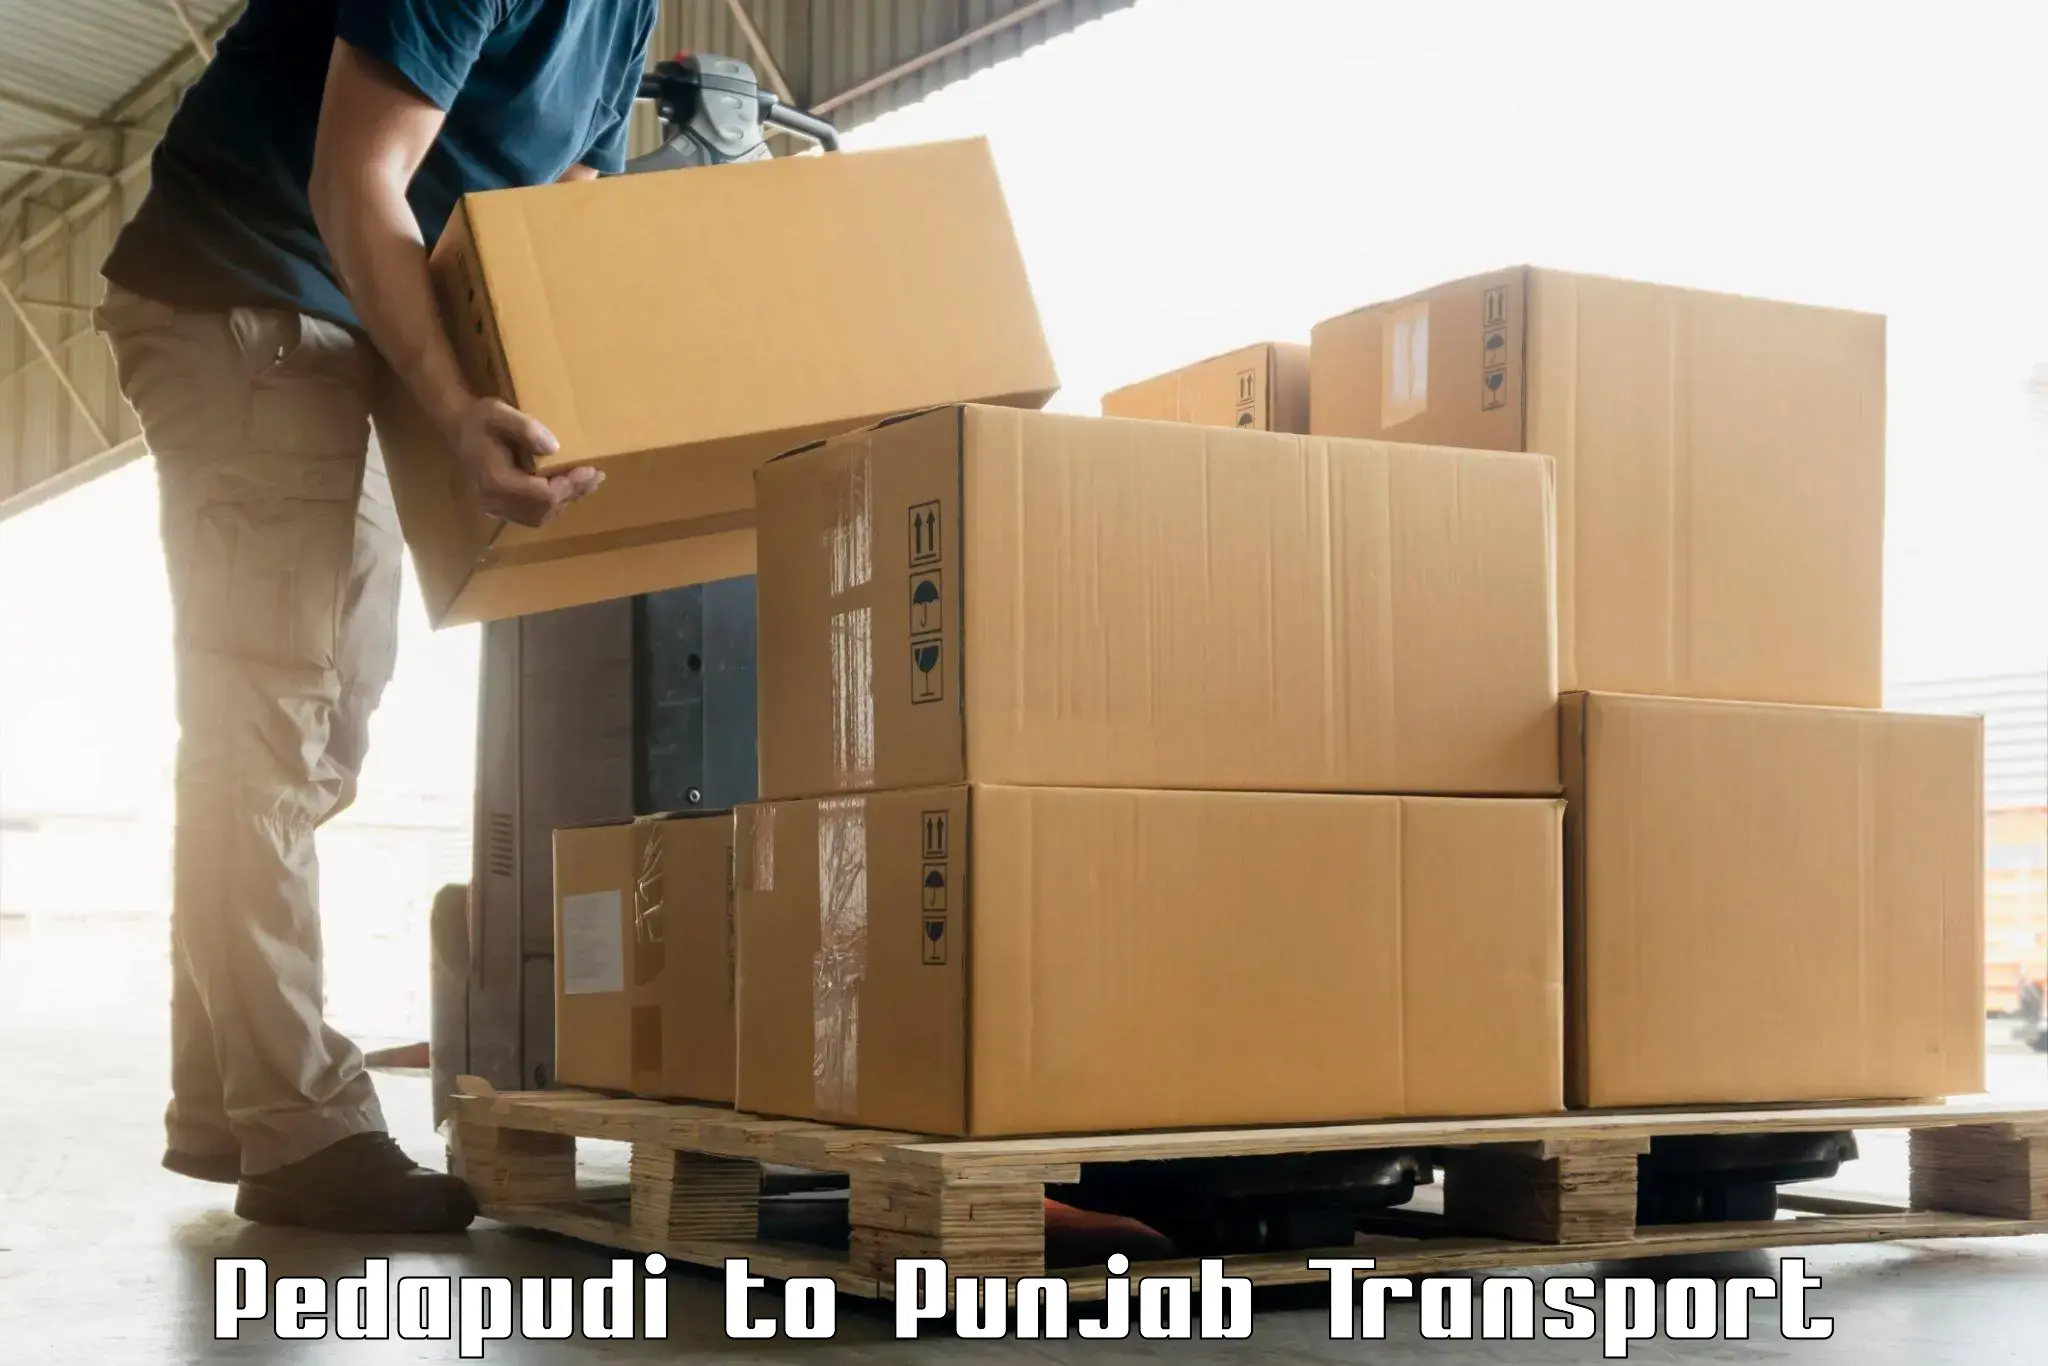 Part load transport service in India Pedapudi to Punjab